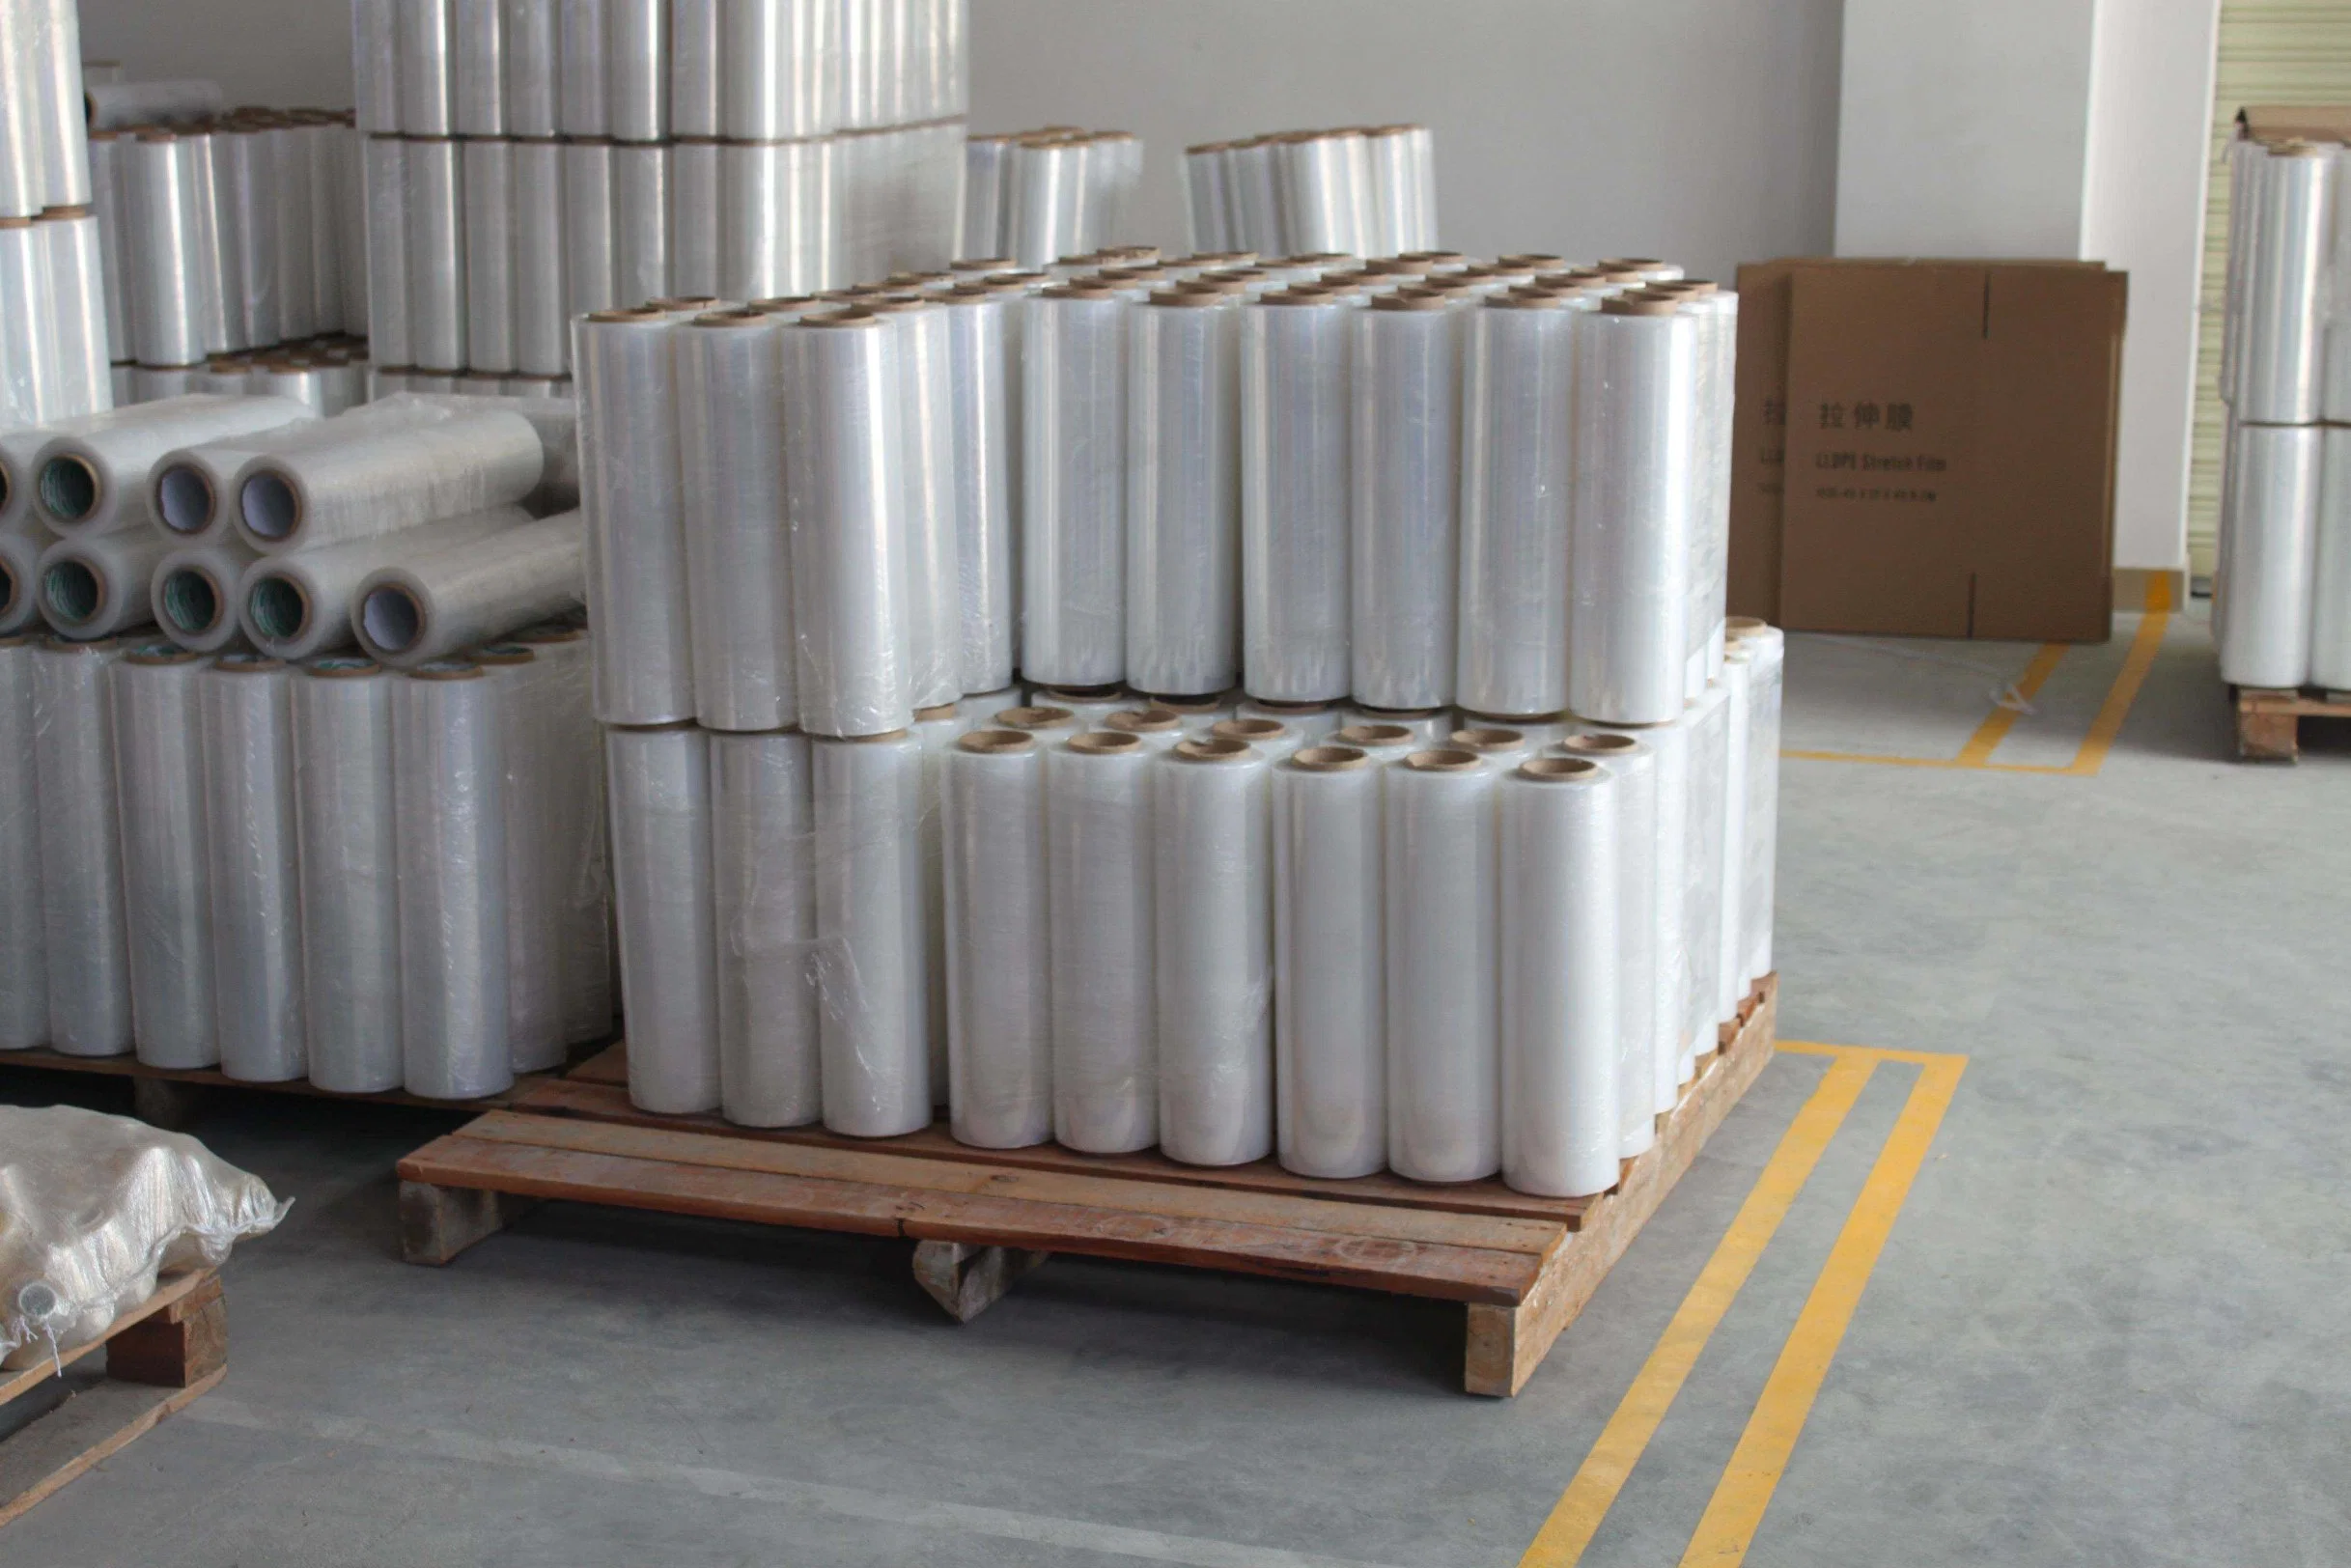 LLDPE Wrapping Pallet Transparent Stretch Hood Film Packaging Shrink Film Wrap Roll Hand Clear Stretch Film